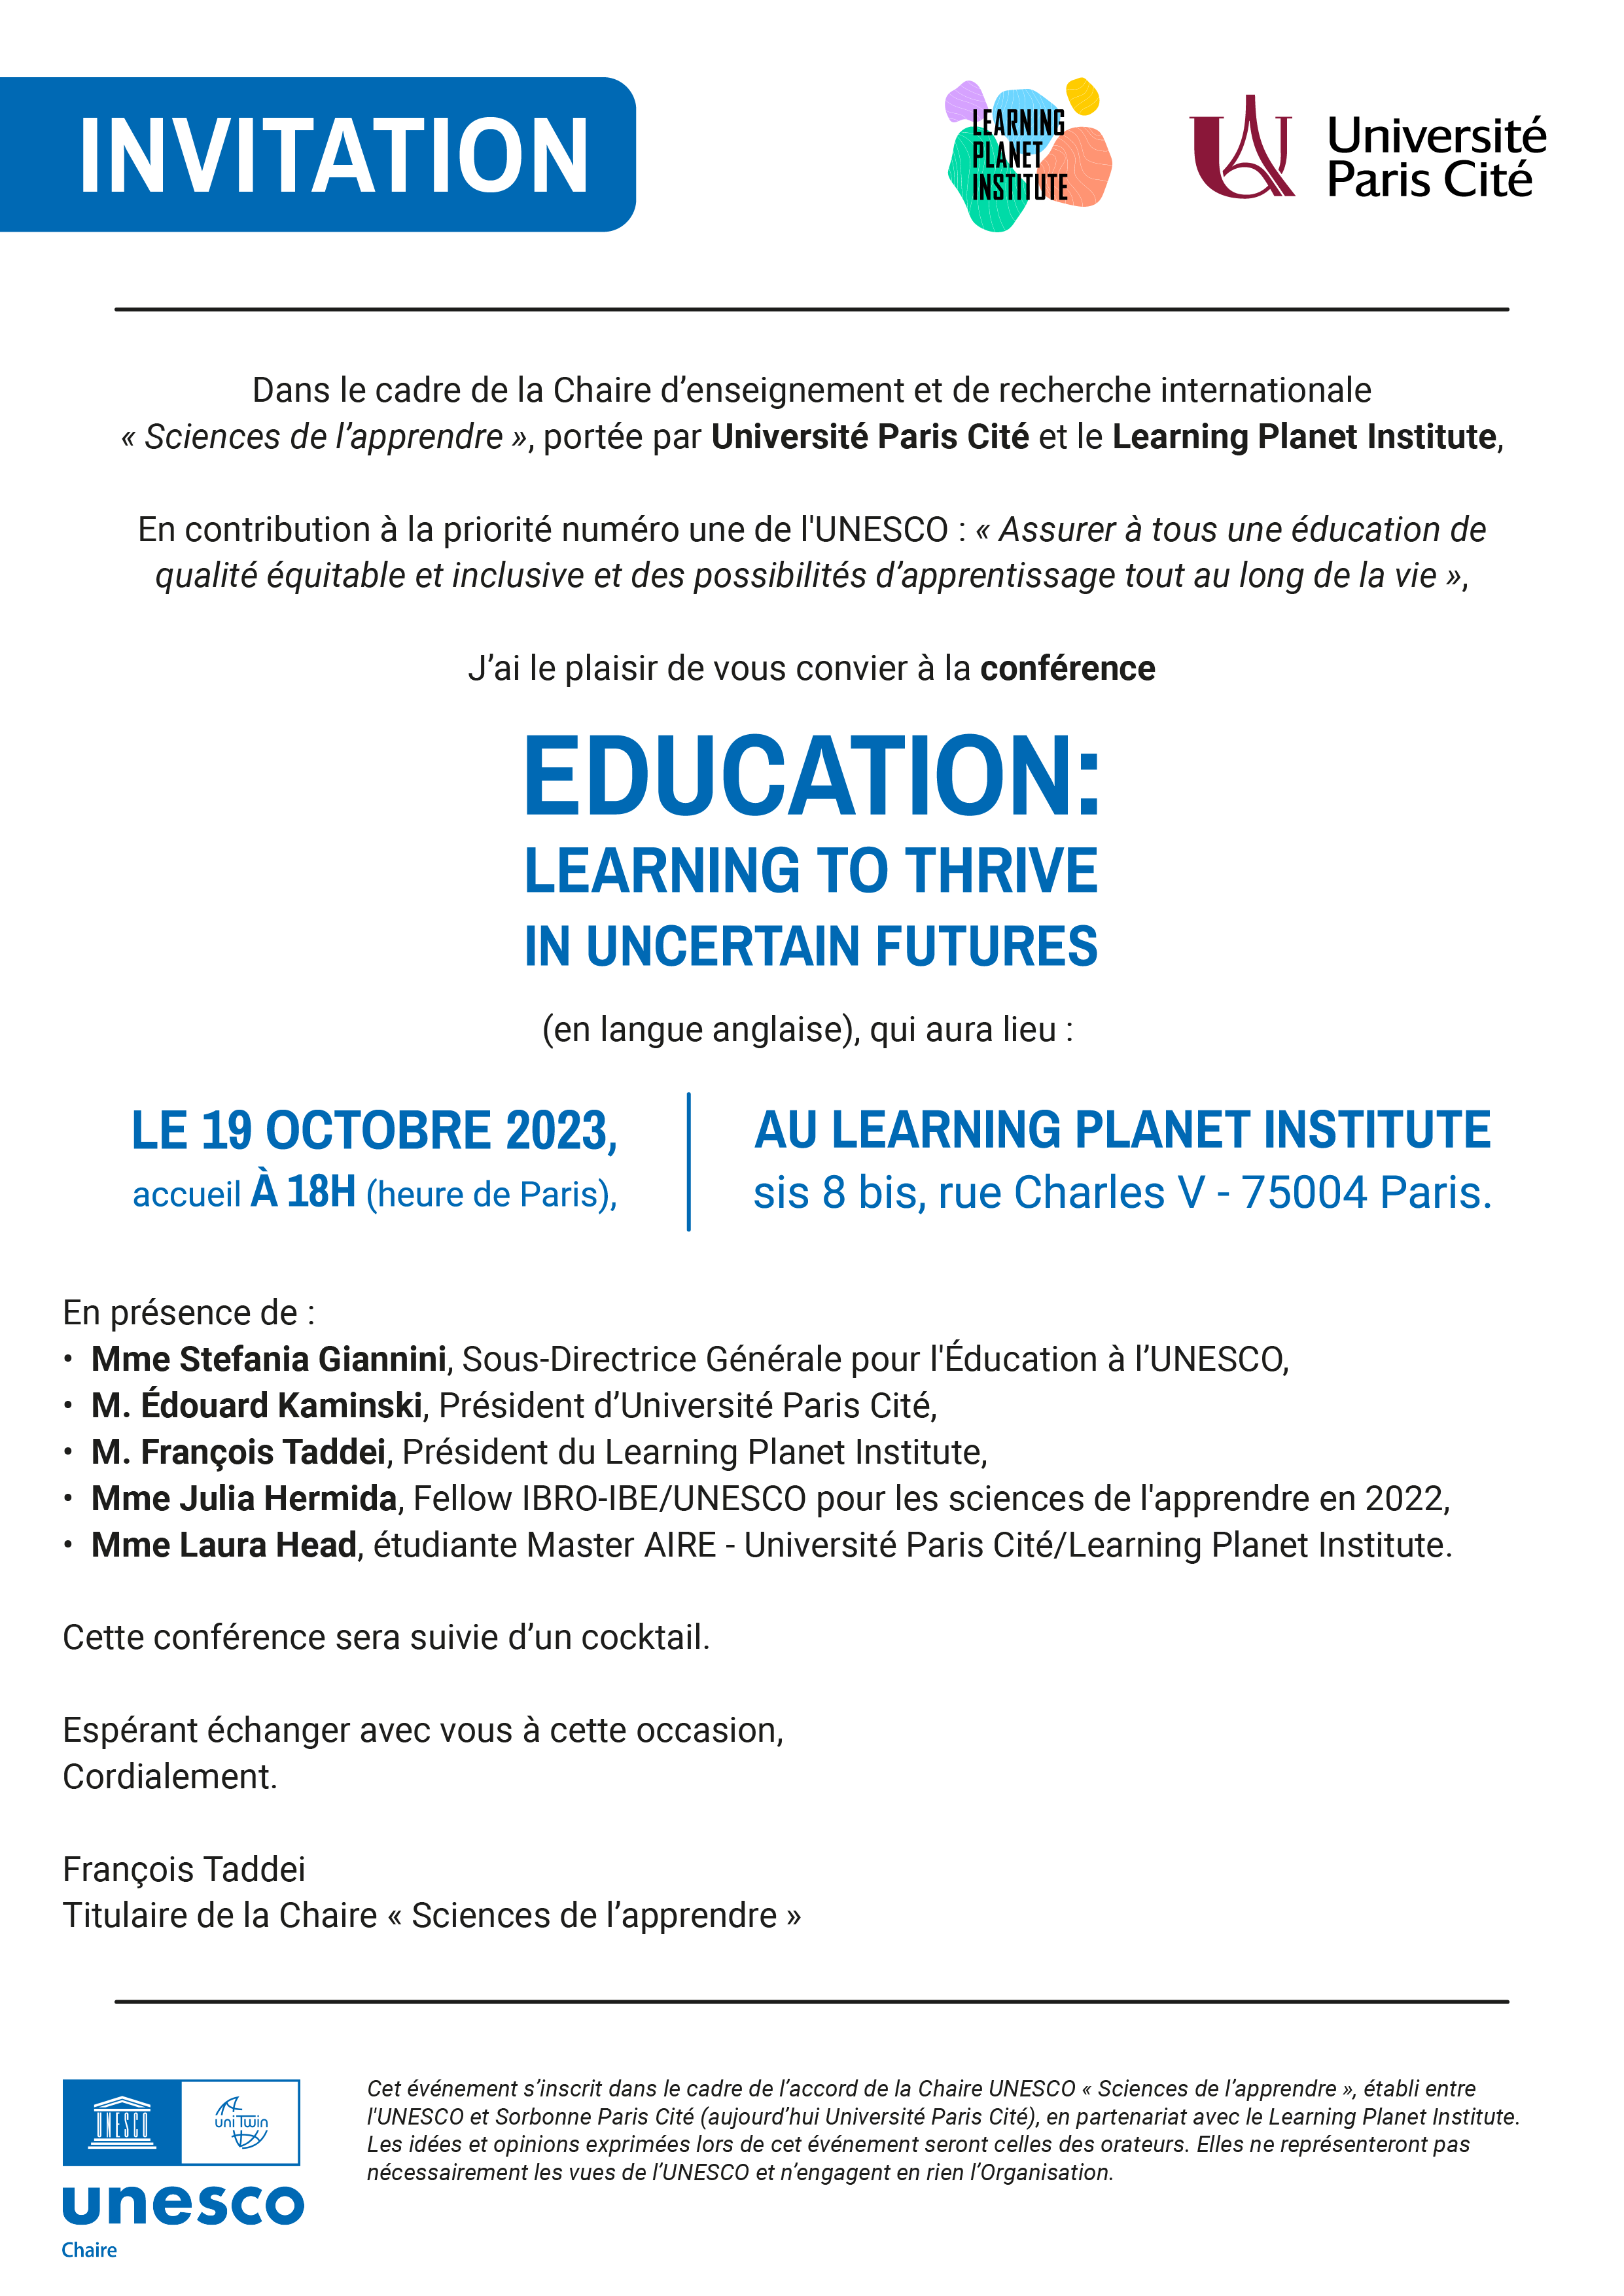 CHAIRE UNESCO conf inaugurale invit emailing Conférence Chaire UNESCO: "Education: Learning to thrive in uncertain futures"